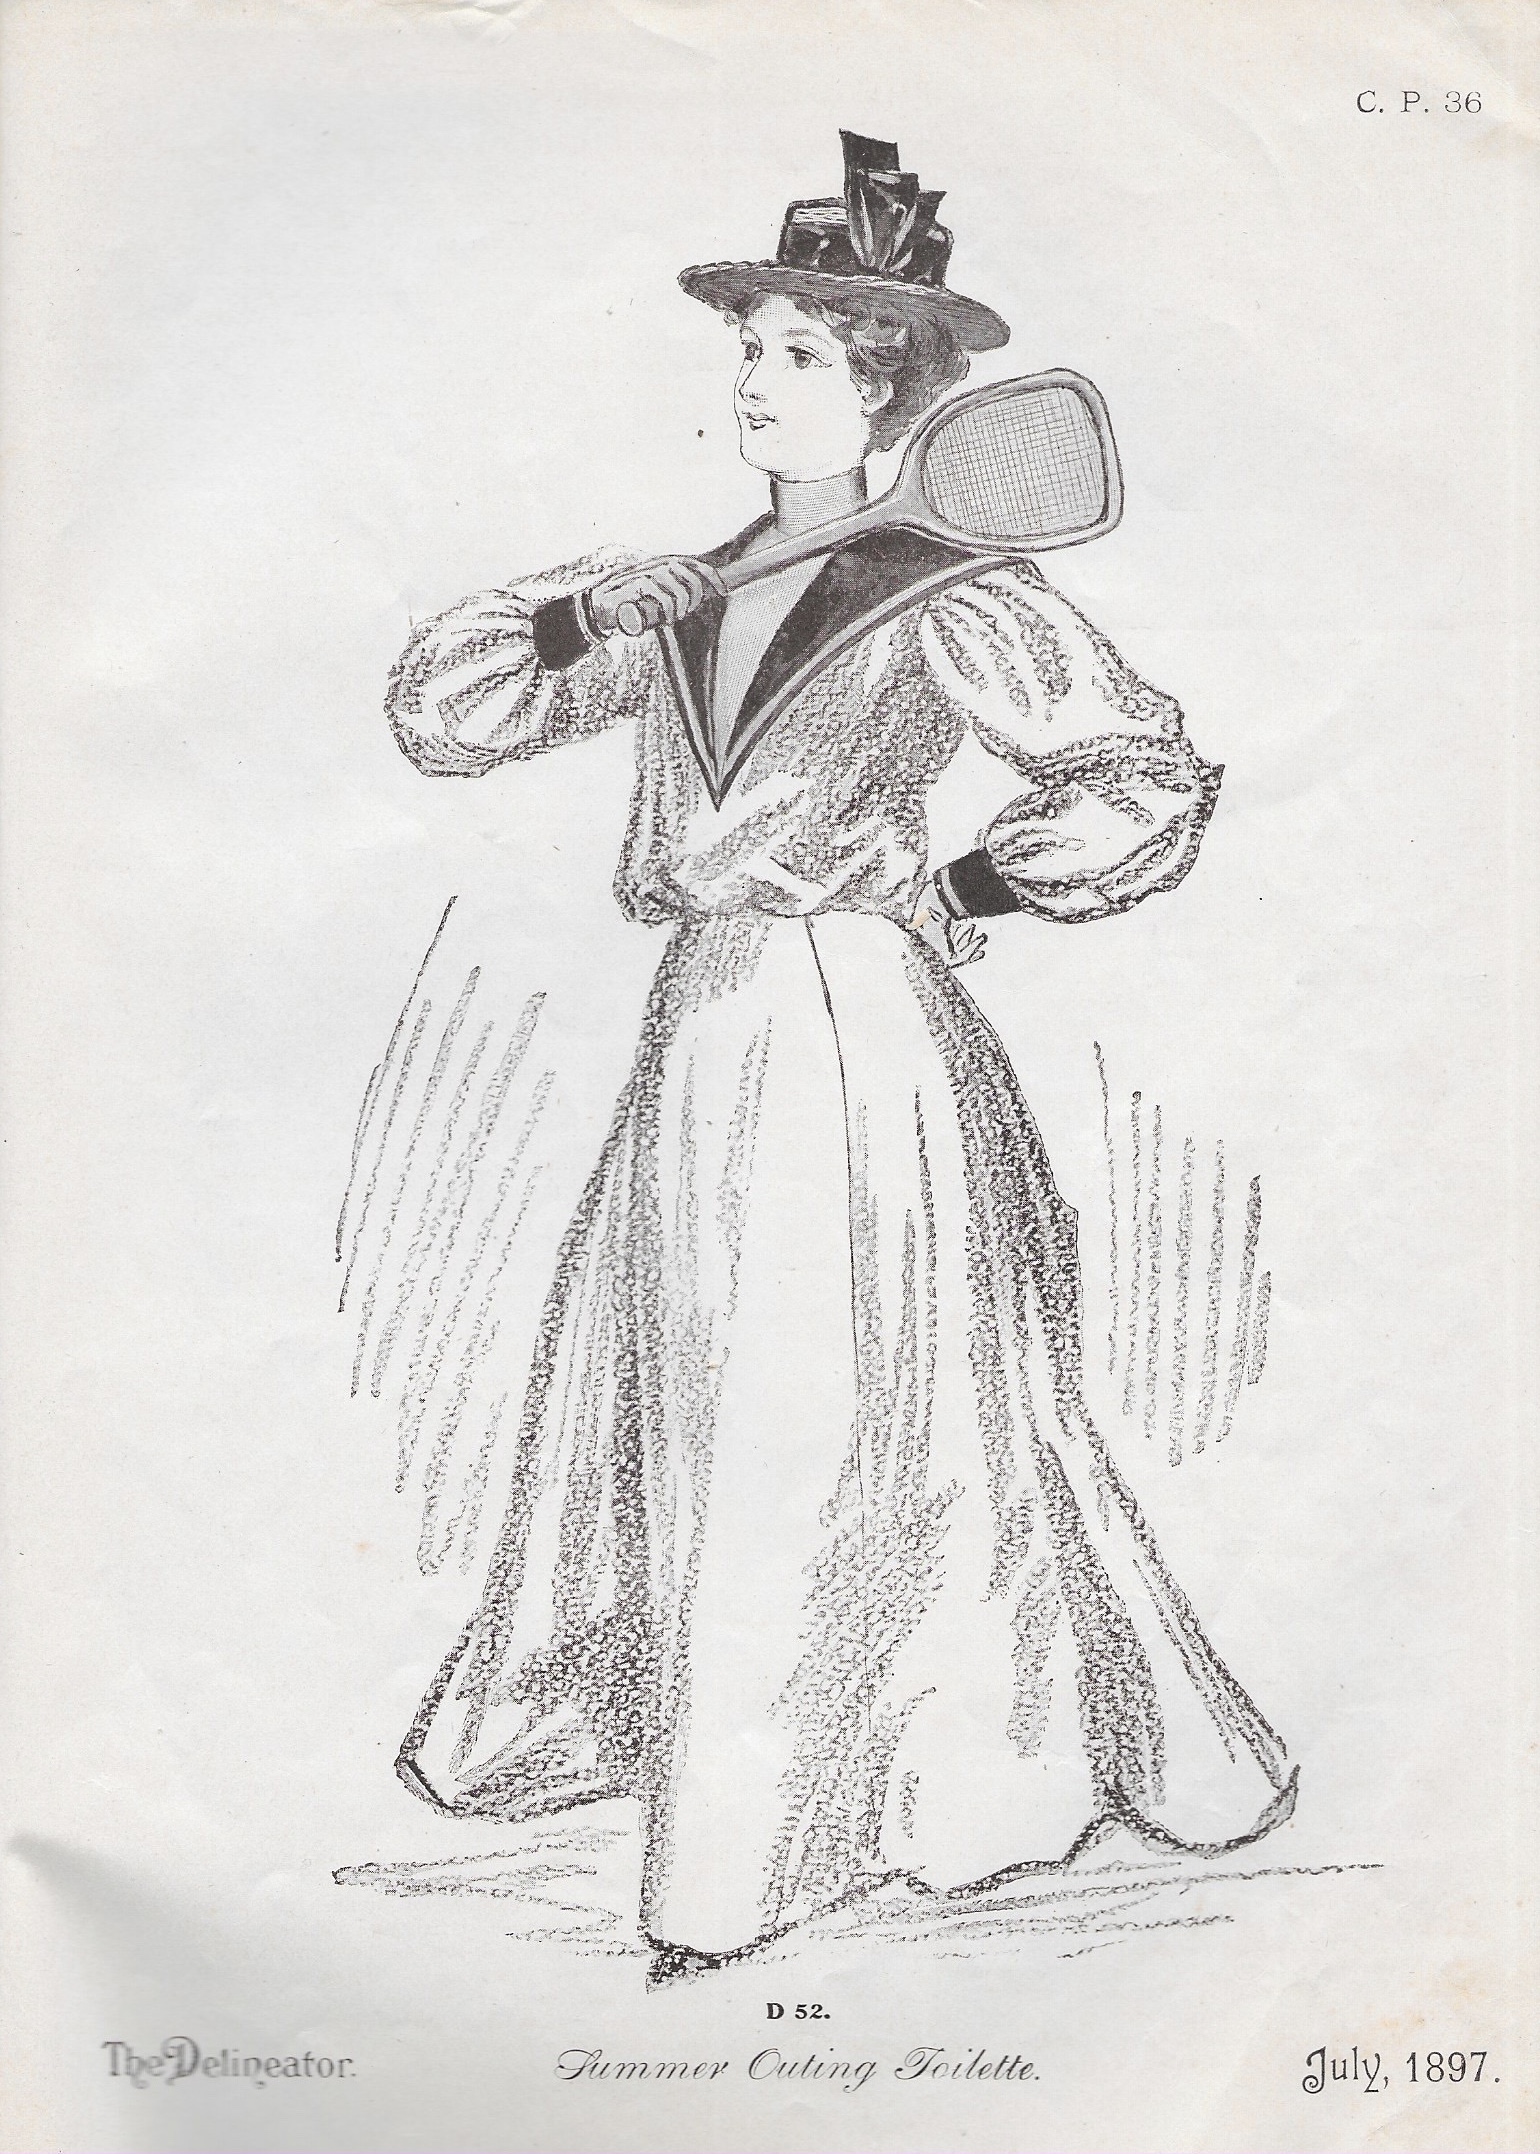 Womens & Girls Fashion Plates of the 1850s-60s | The 